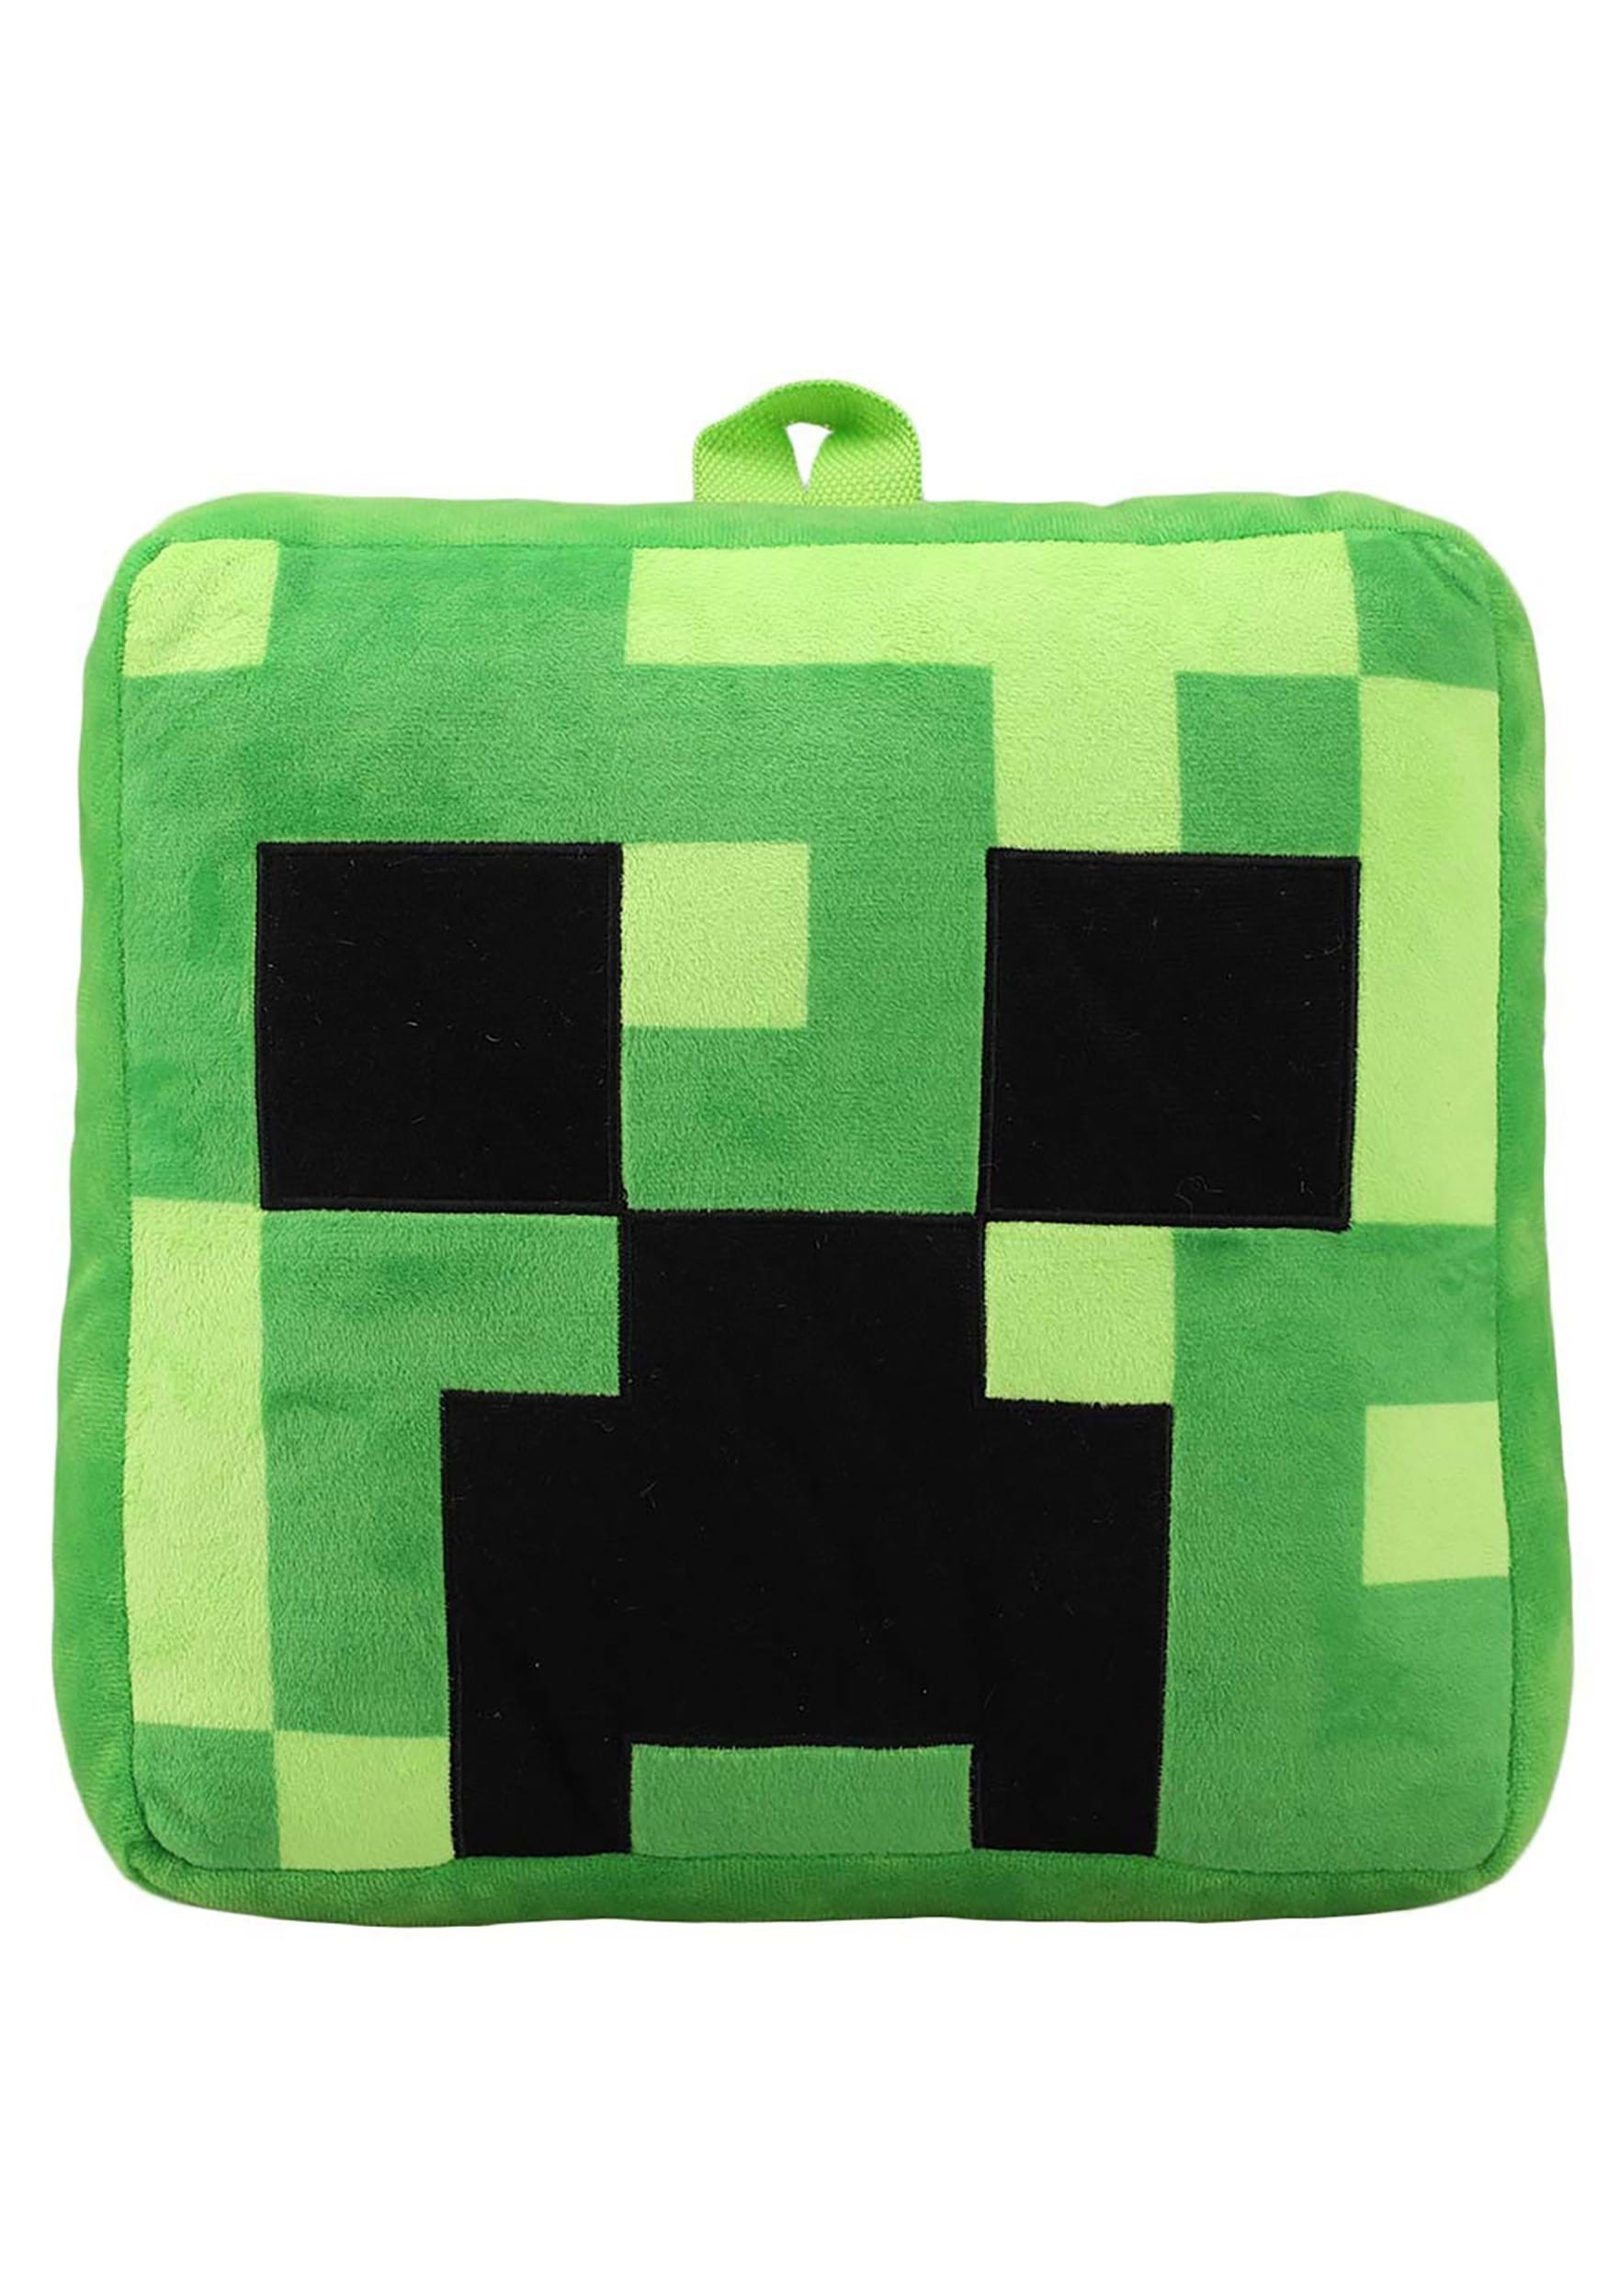 Minecraft Creeper Pillow Backpack for Kids